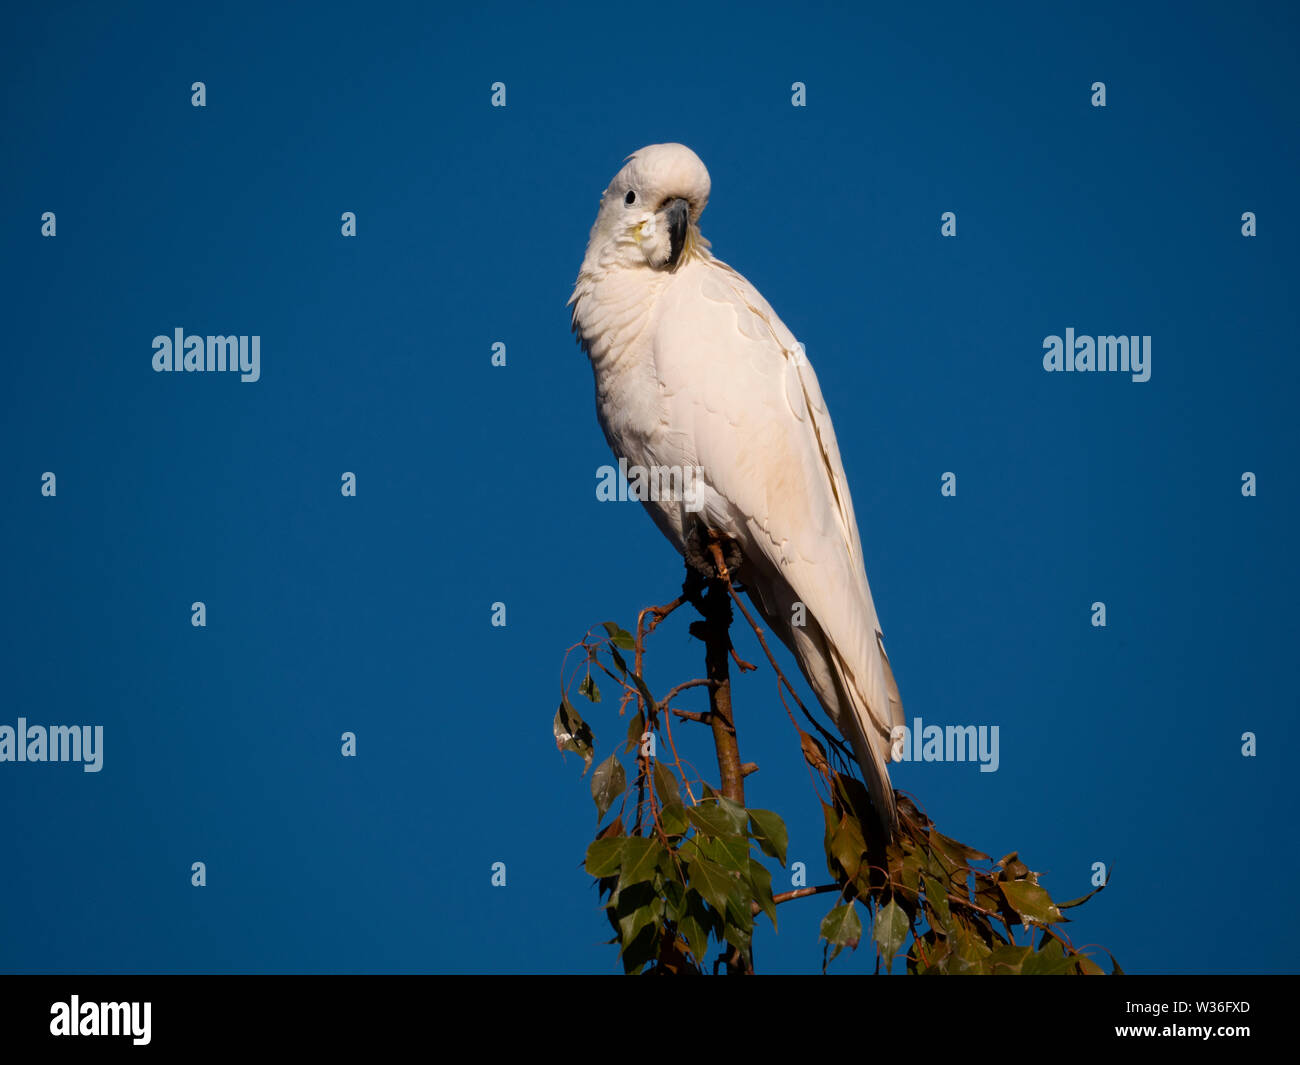 Sulphur-crested Cockatoo, Cacatua galerita, perched in a tree with blue sky background near Dubbo New South Wales, Australia Stock Photo